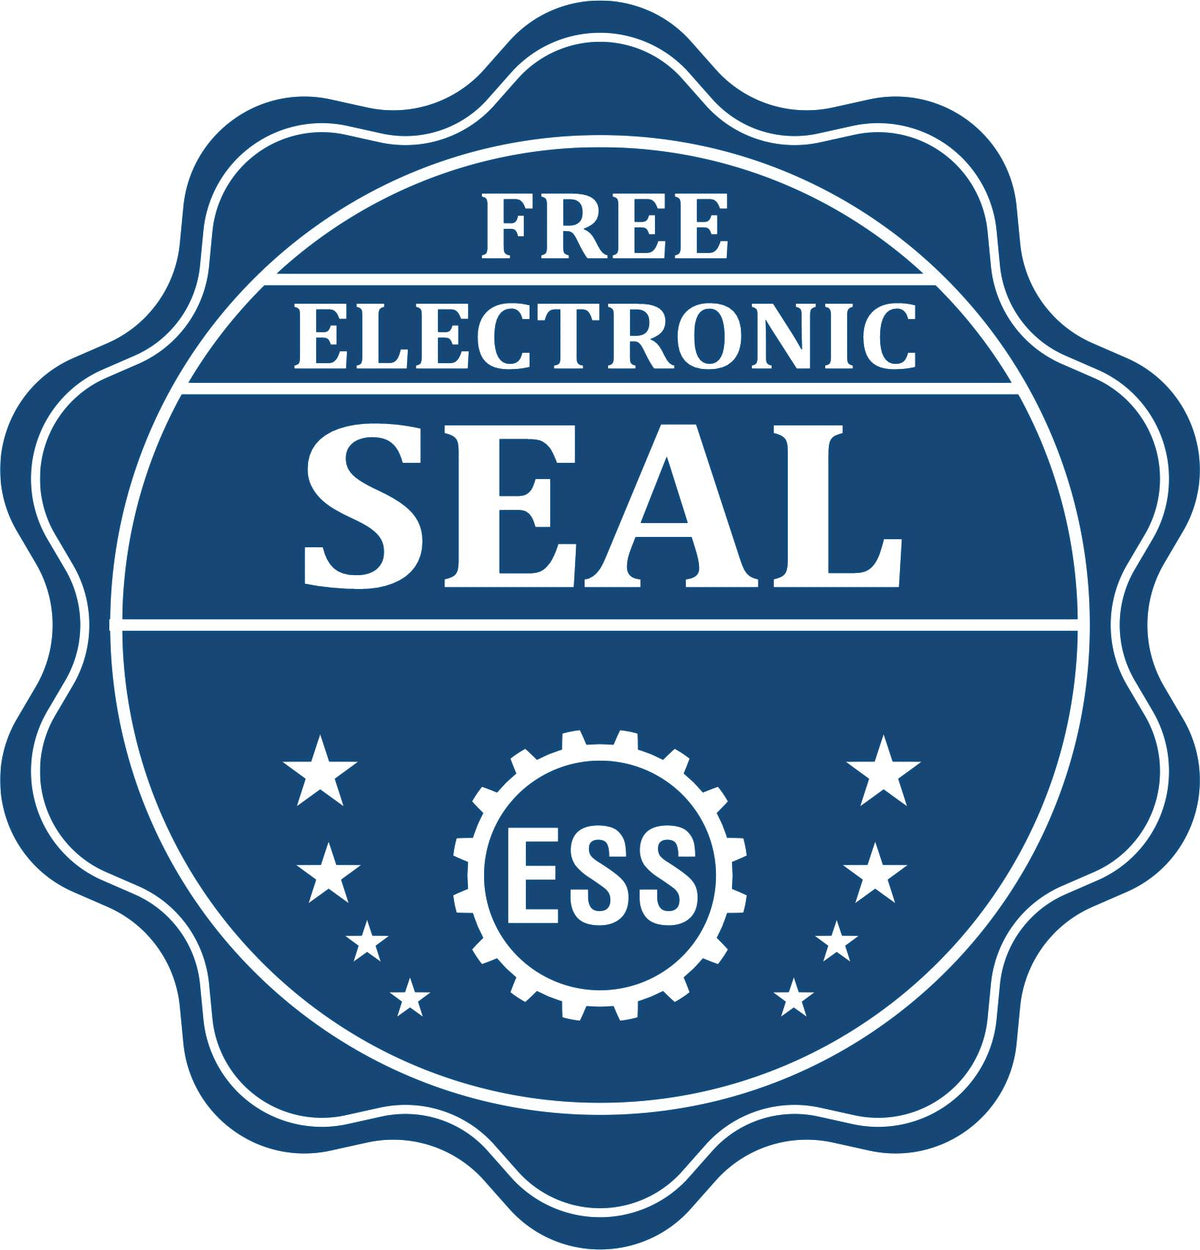 A badge showing a free electronic seal for the Super Slim Guam Notary Public Stamp with stars and the ESS gear on the emblem.